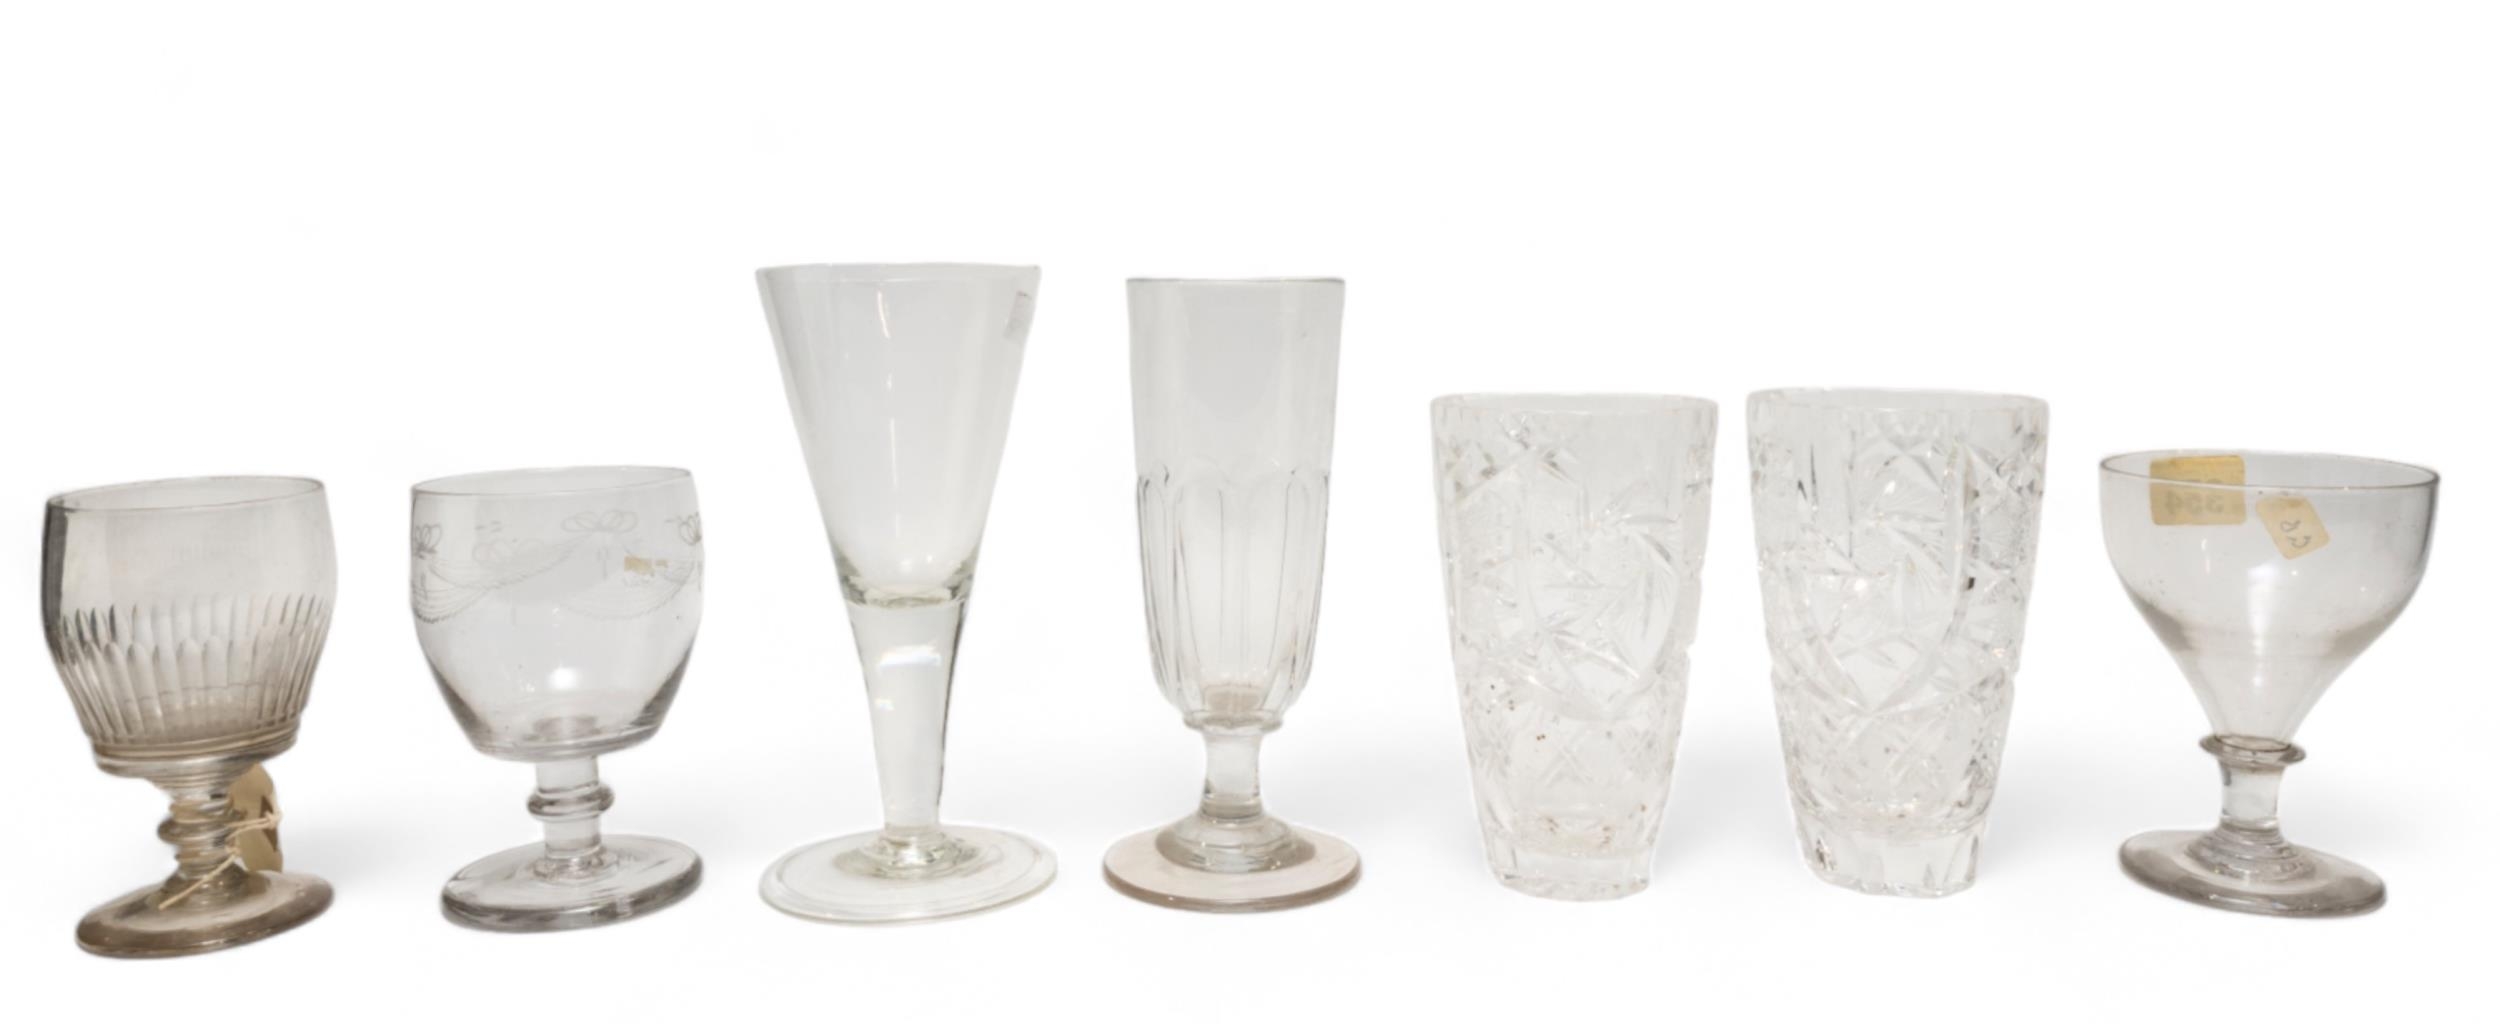 A LARGE MIXED GROUP OF STEMMED GLASSES AND TUMBLERS, PREDOMINANTLY 18TH/19TH CENTURY, the group - Image 2 of 7